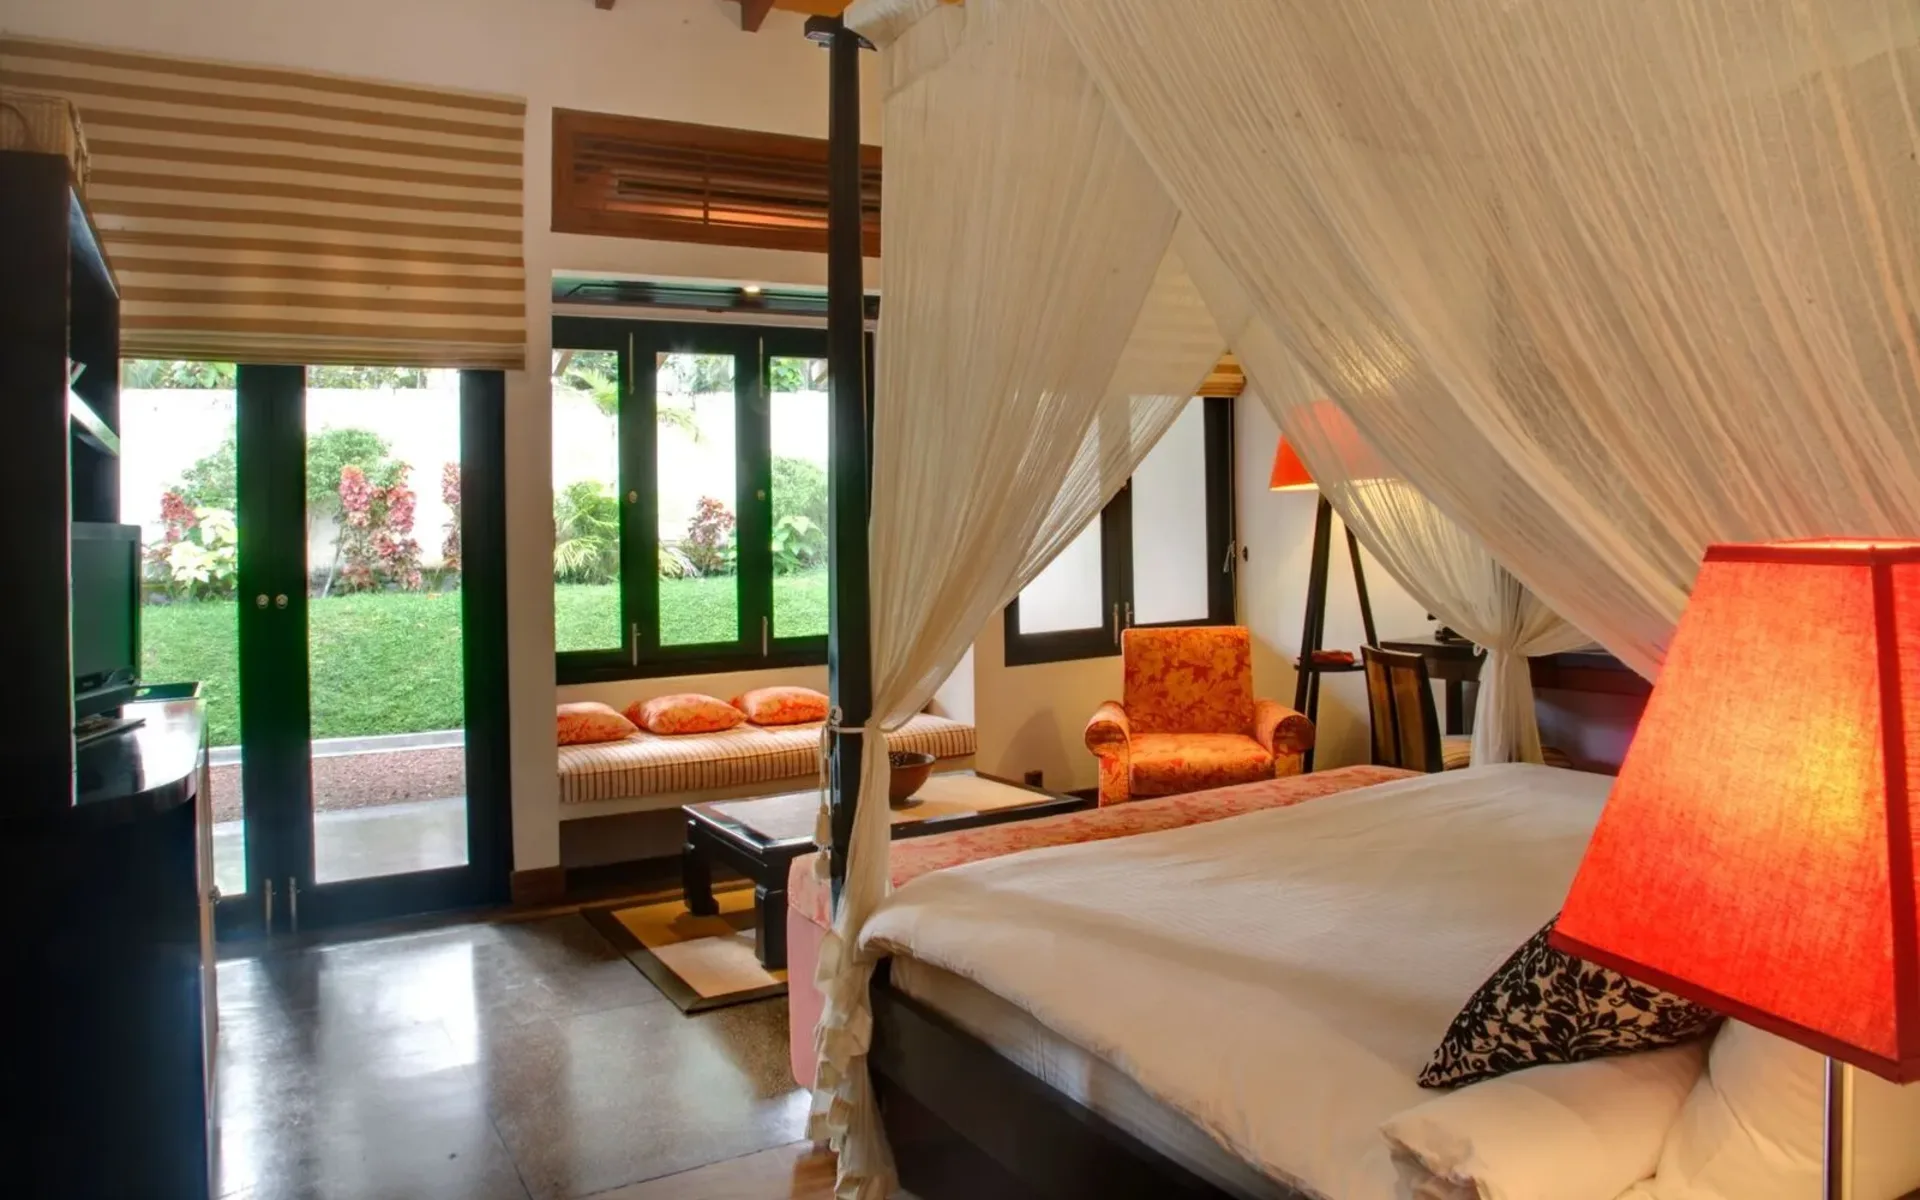 One of the bedrooms in the Wallawwa suites is dressed in comfy furnishings, accented by bright orange tones